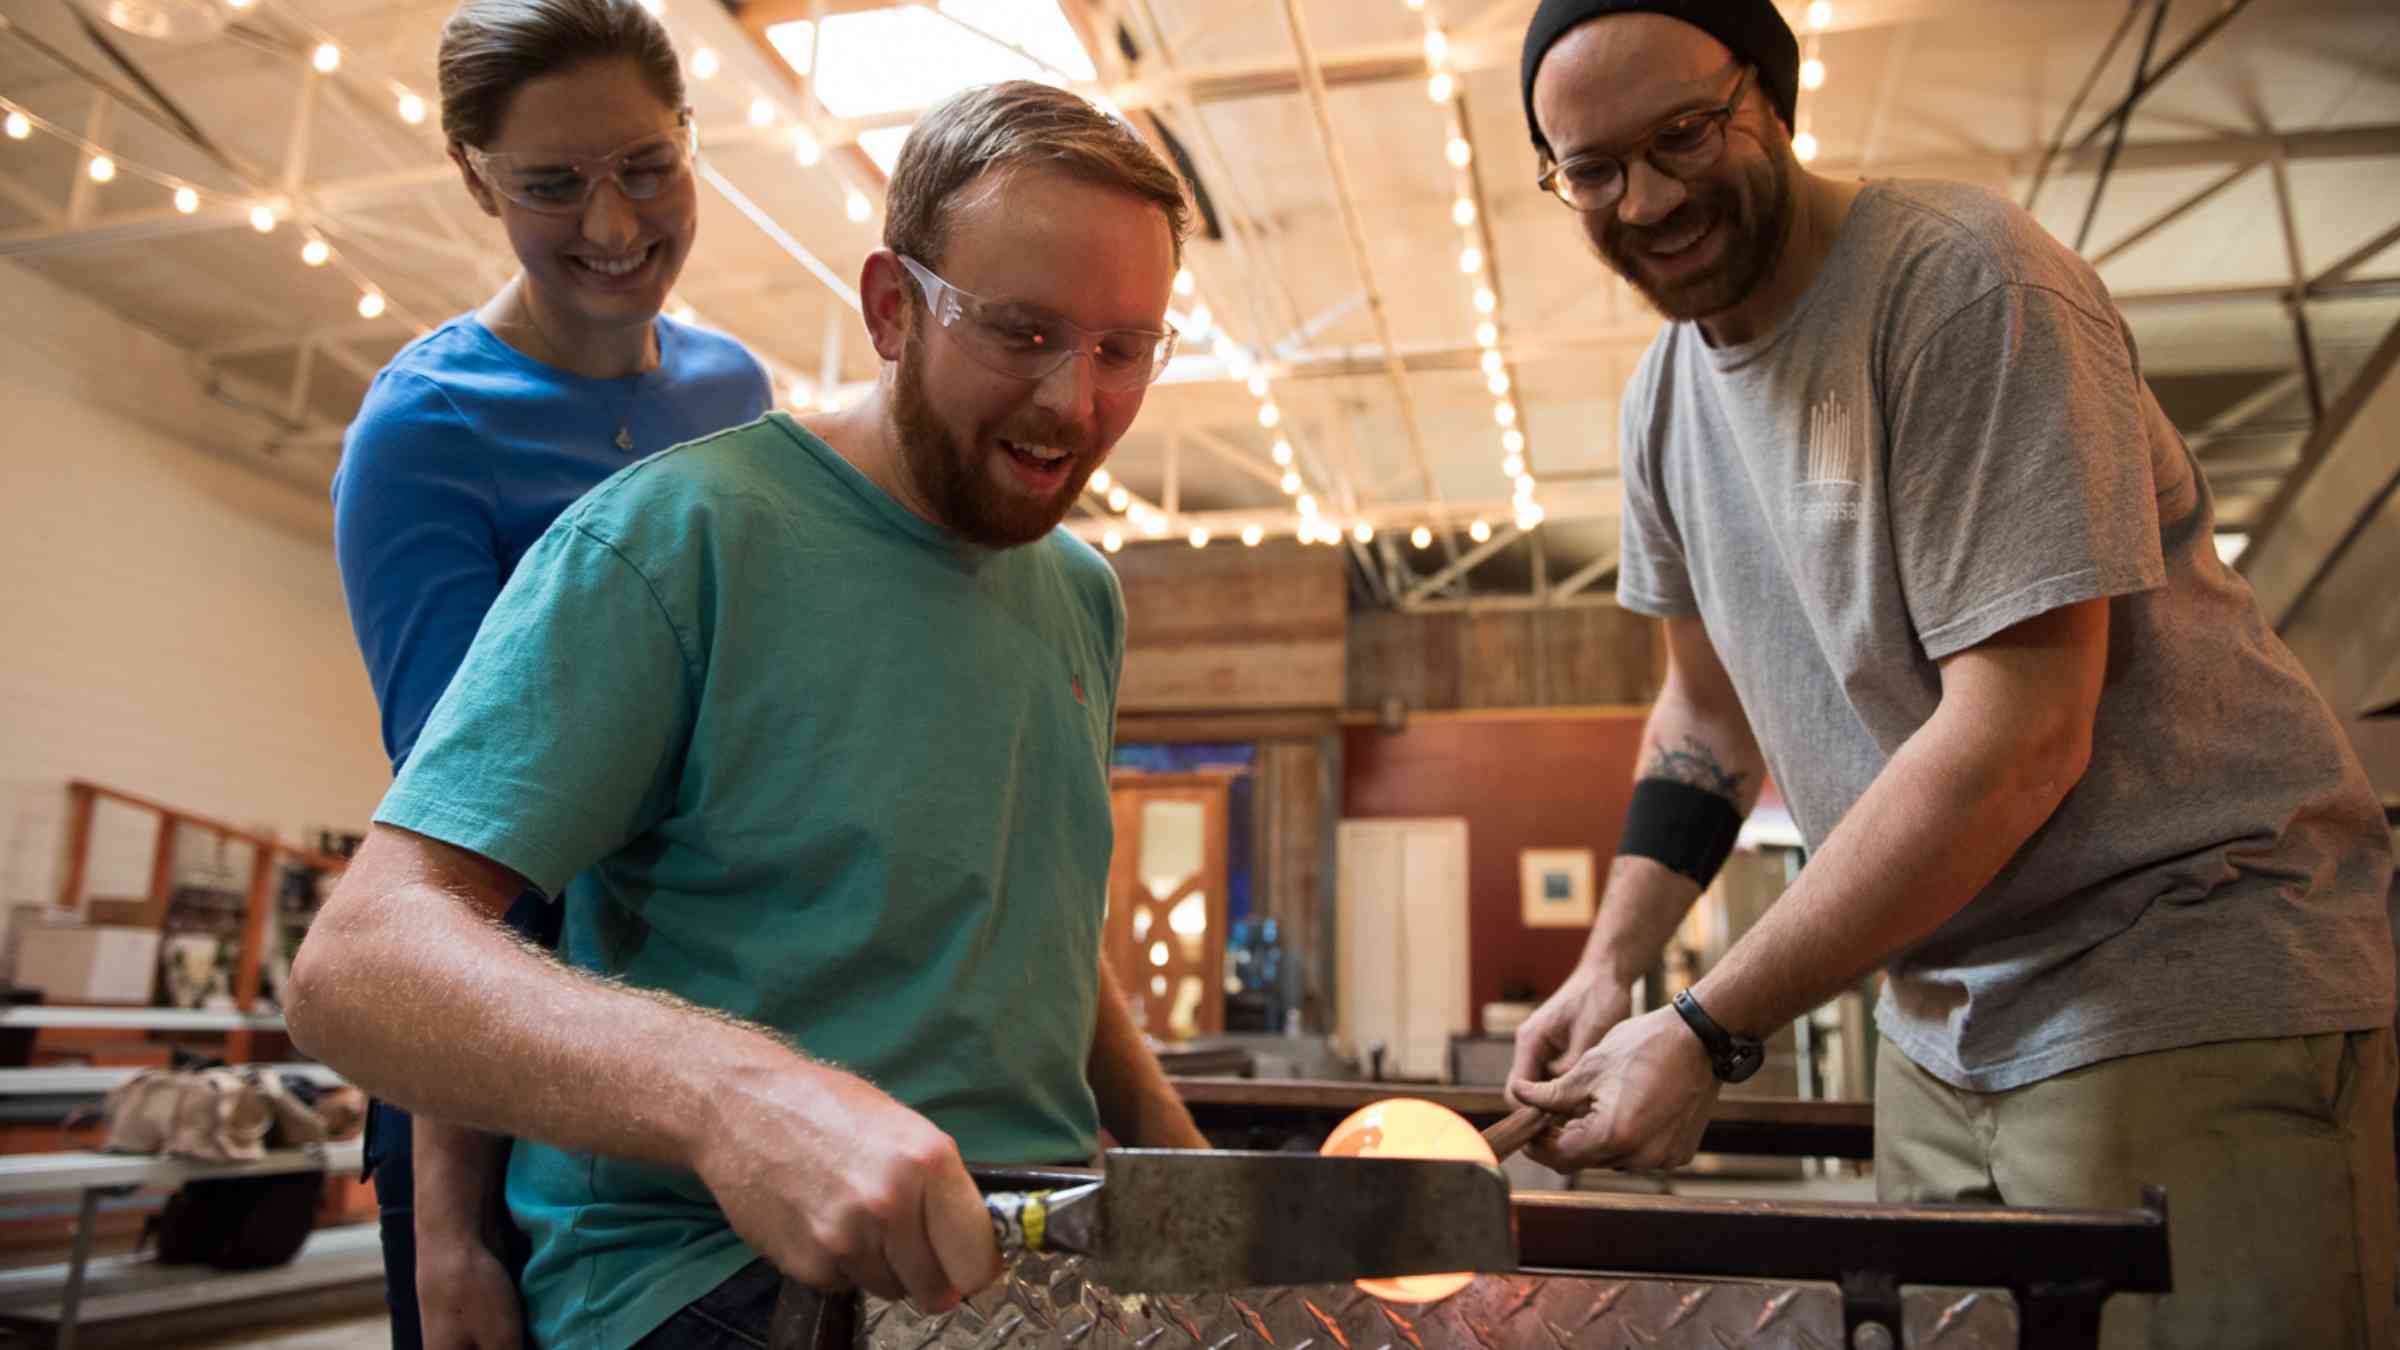 Private Glass Blowing Class